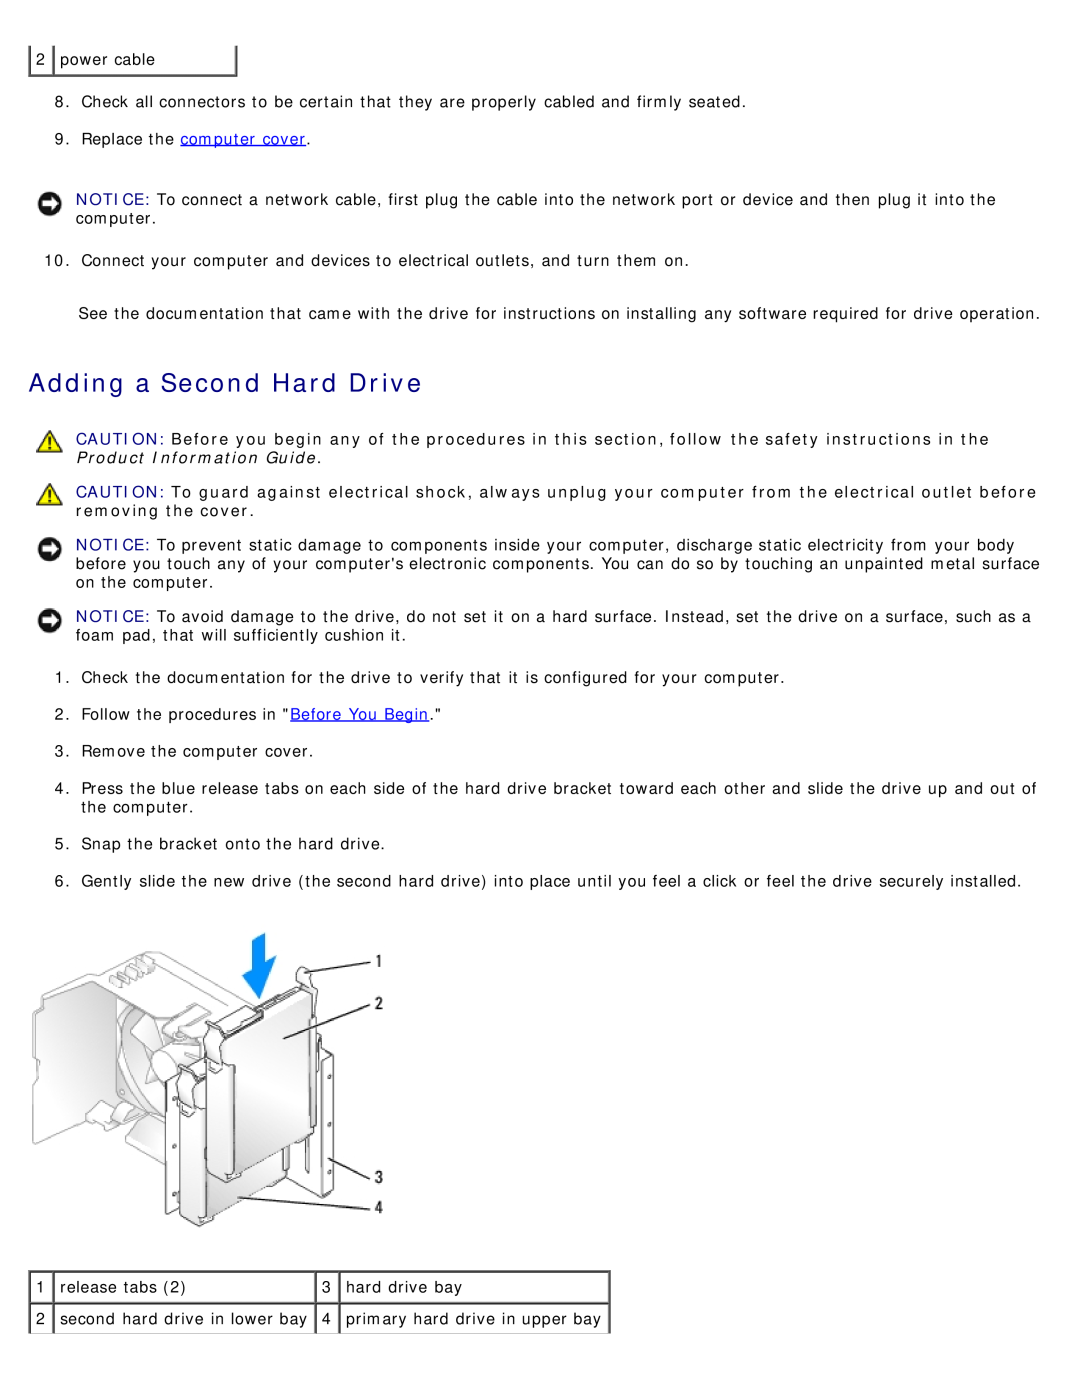 Dell DCSM manual Adding a Second Hard Drive, Replace the computer cover 